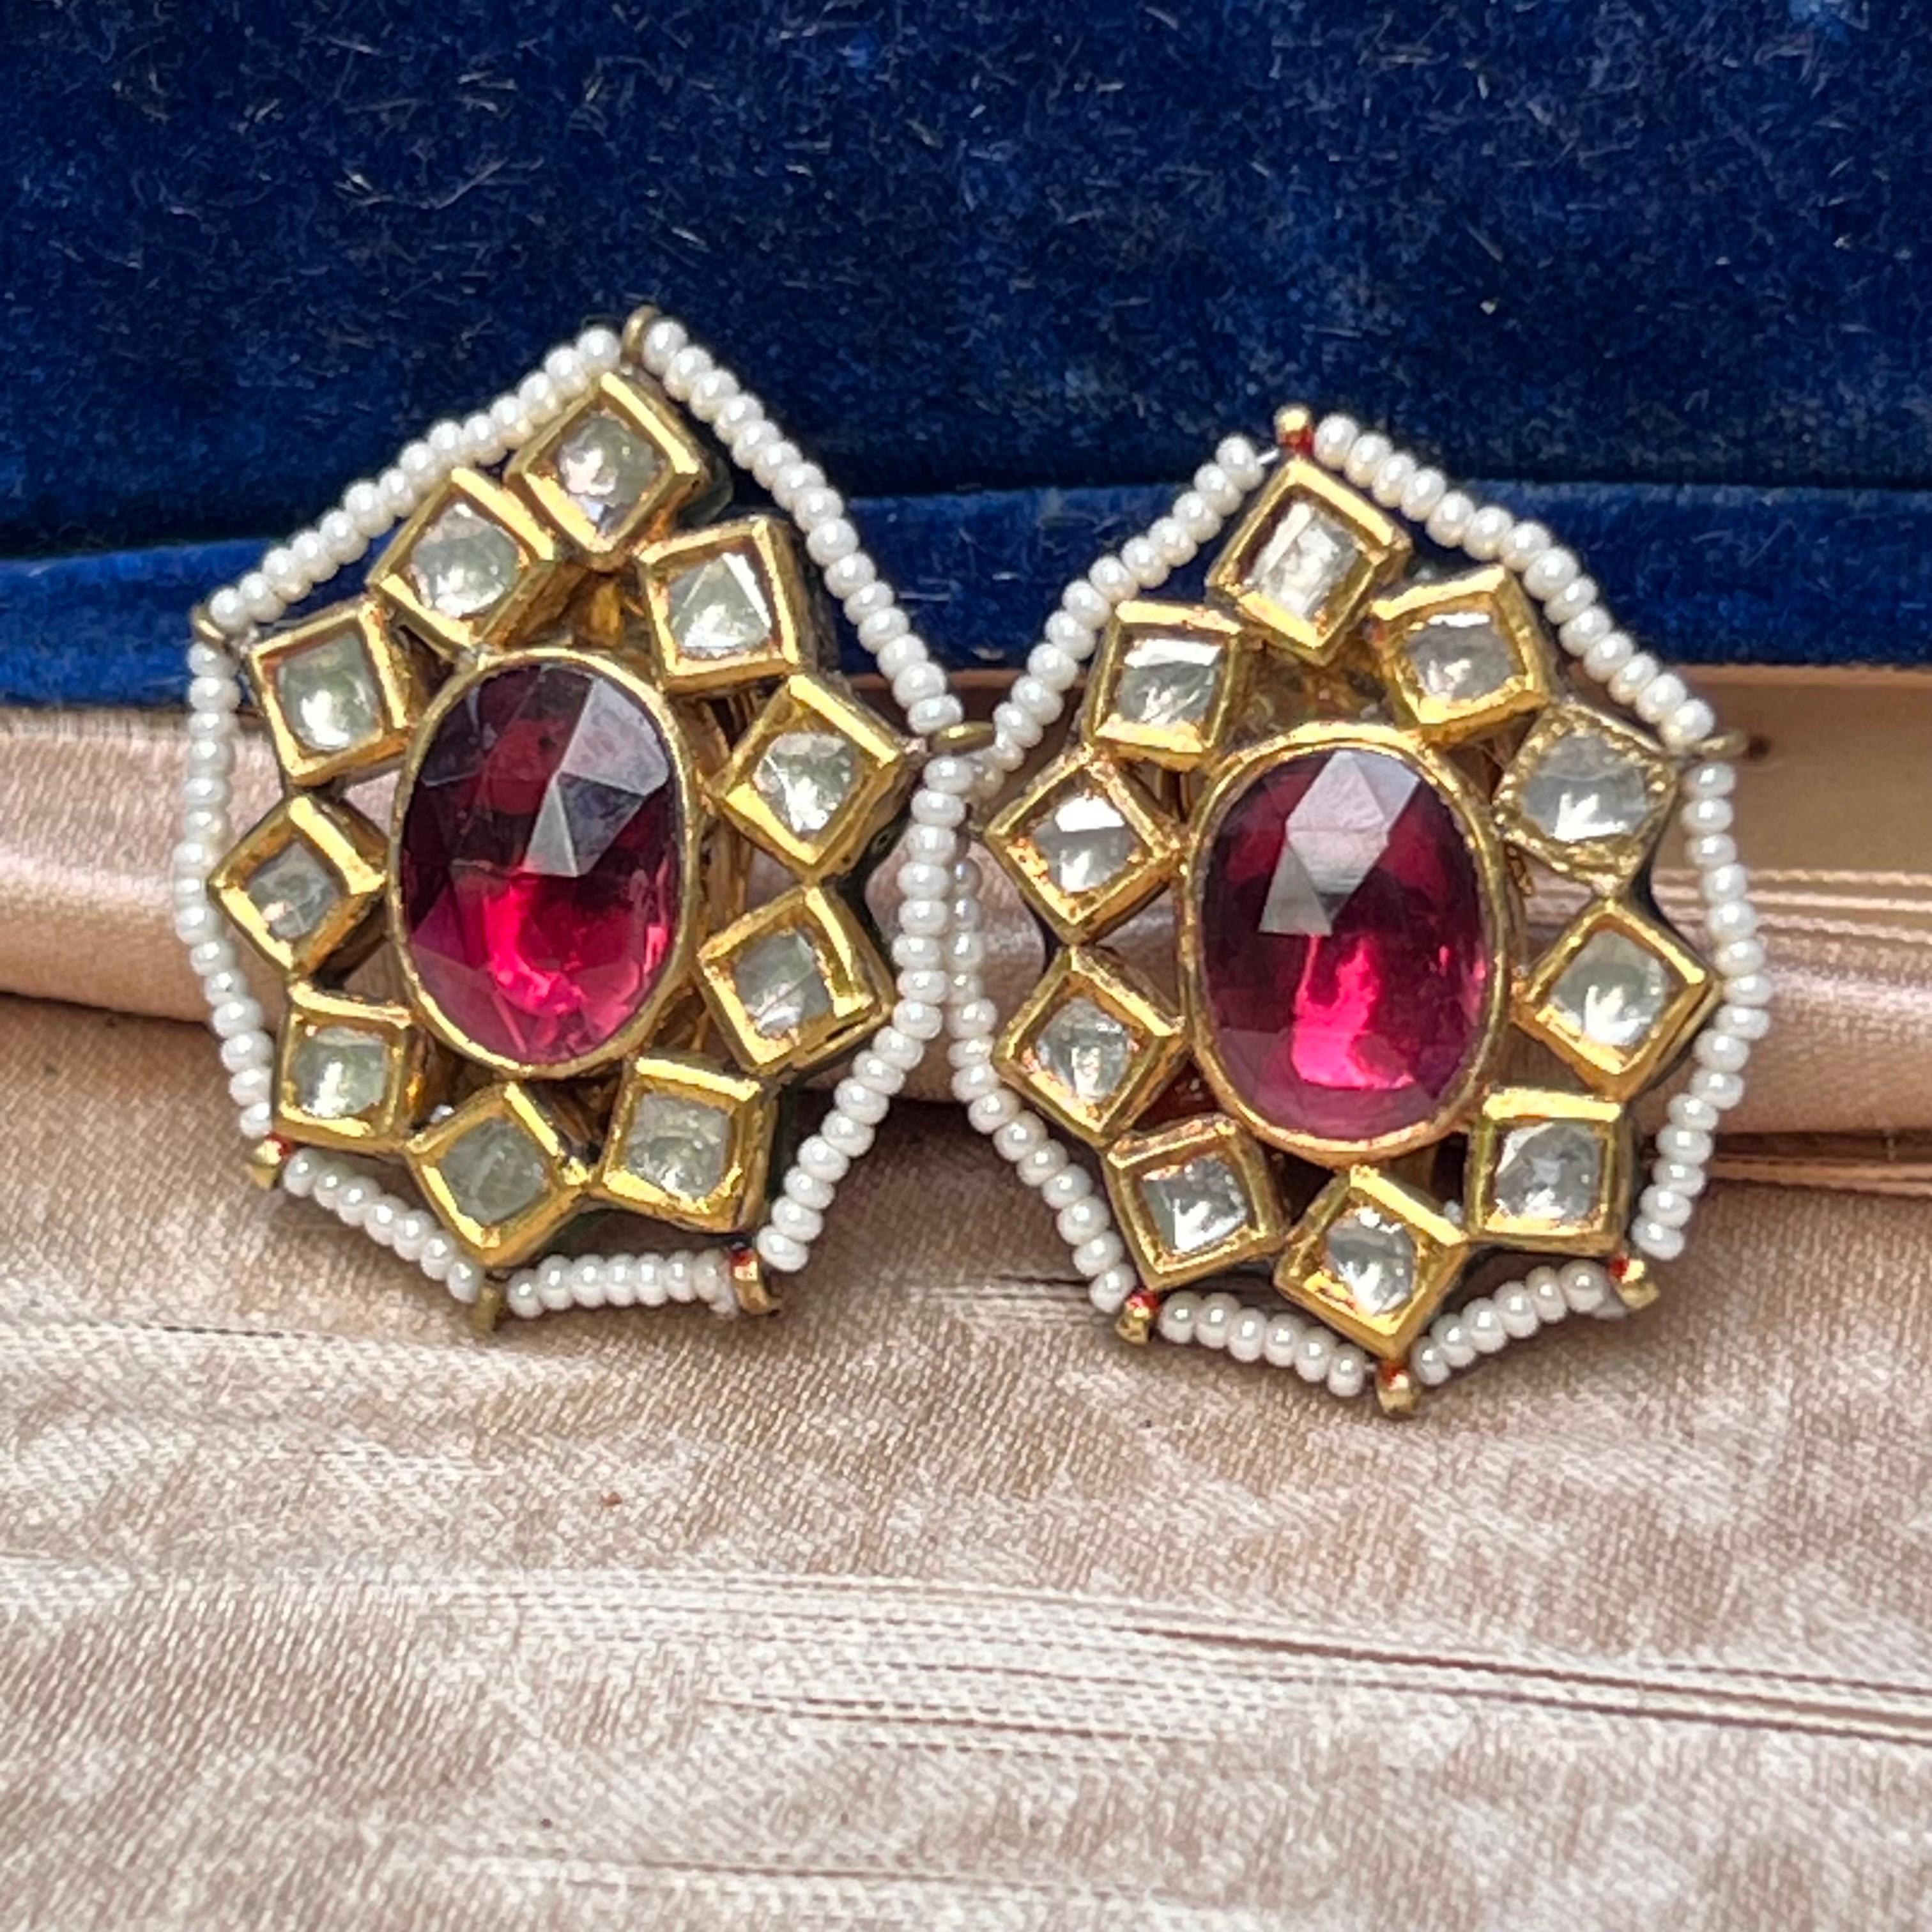 ABSOLUTELY STUNNING LARGE ~ Mughal / Mogul 18kt gold piece turned into a wearable art / button earrings  featuring 10 old cut  diamond and a large faceted Tourmaline on each earrings .
Earring  back is also very beautifully made with multi colored